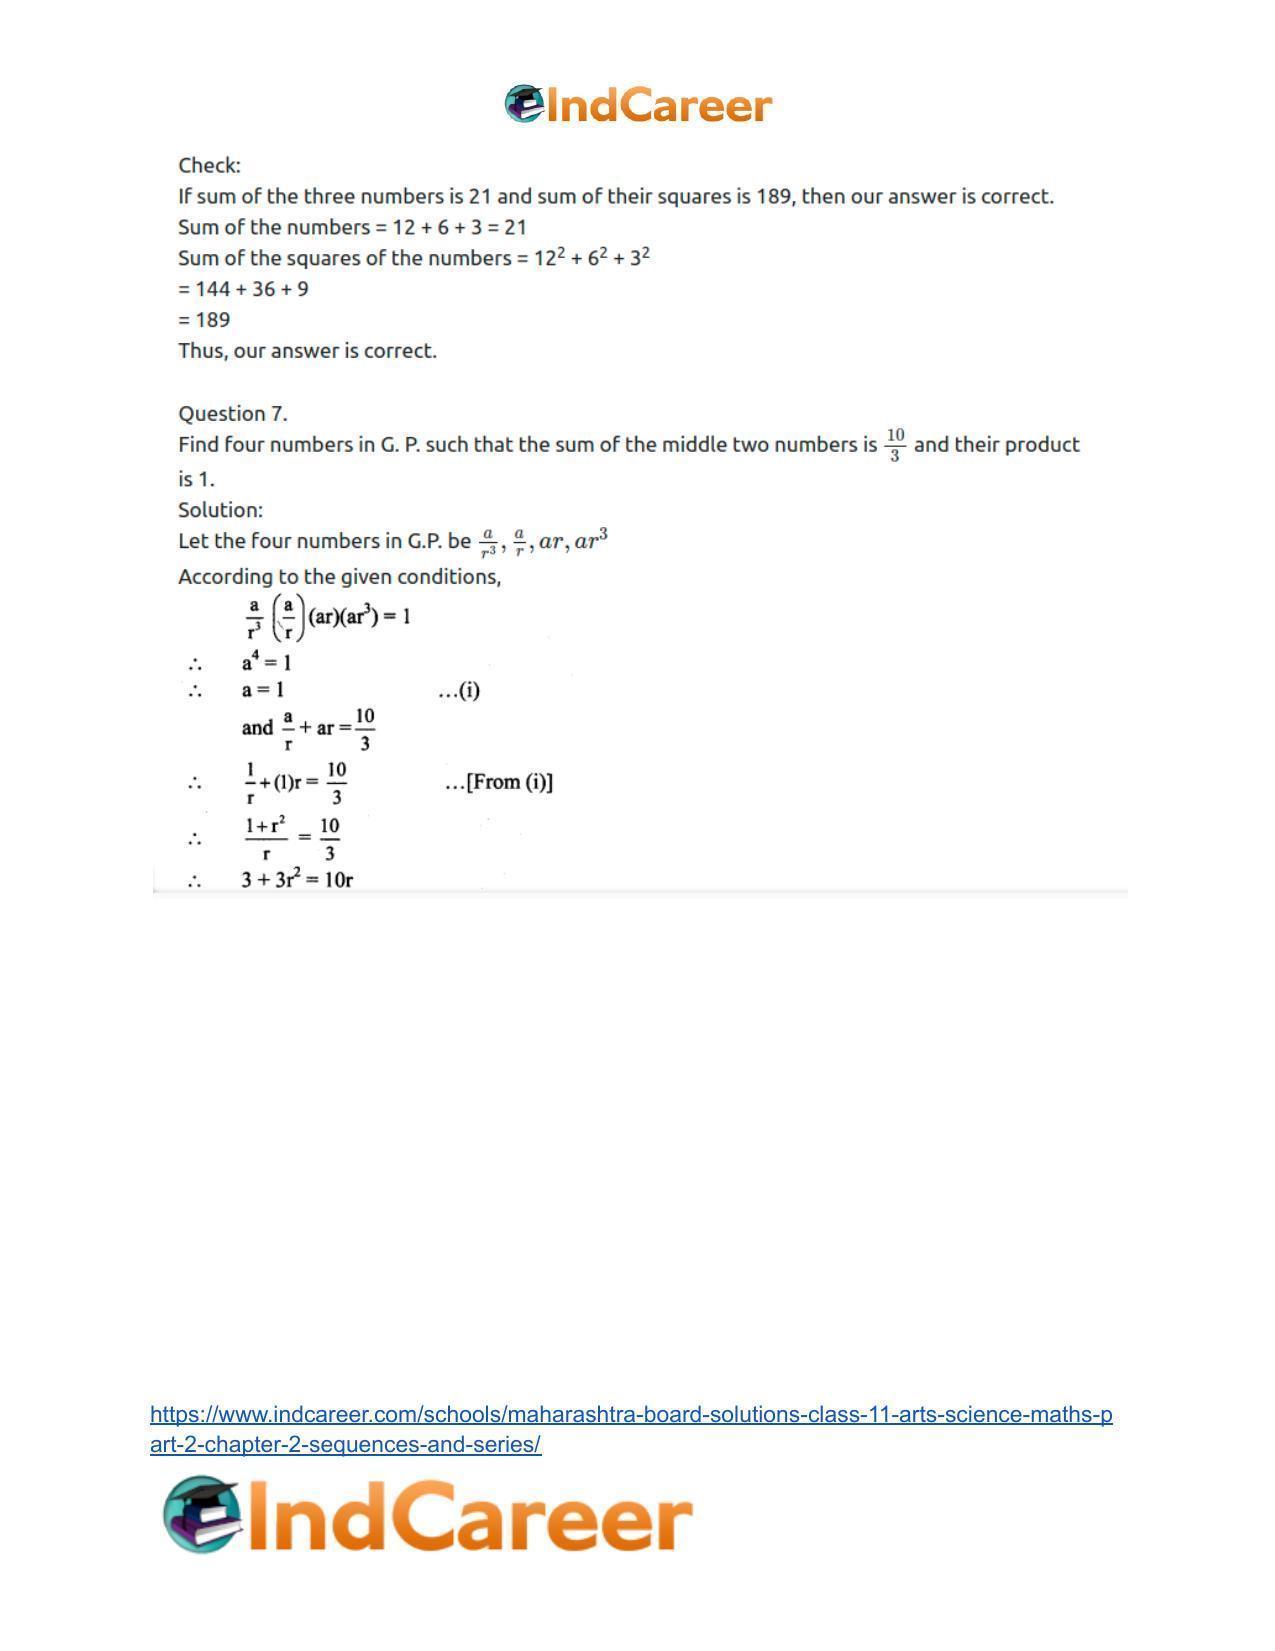 Maharashtra Board Solutions Class 11-Arts & Science Maths (Part 2): Chapter 2- Sequences and Series - Page 13